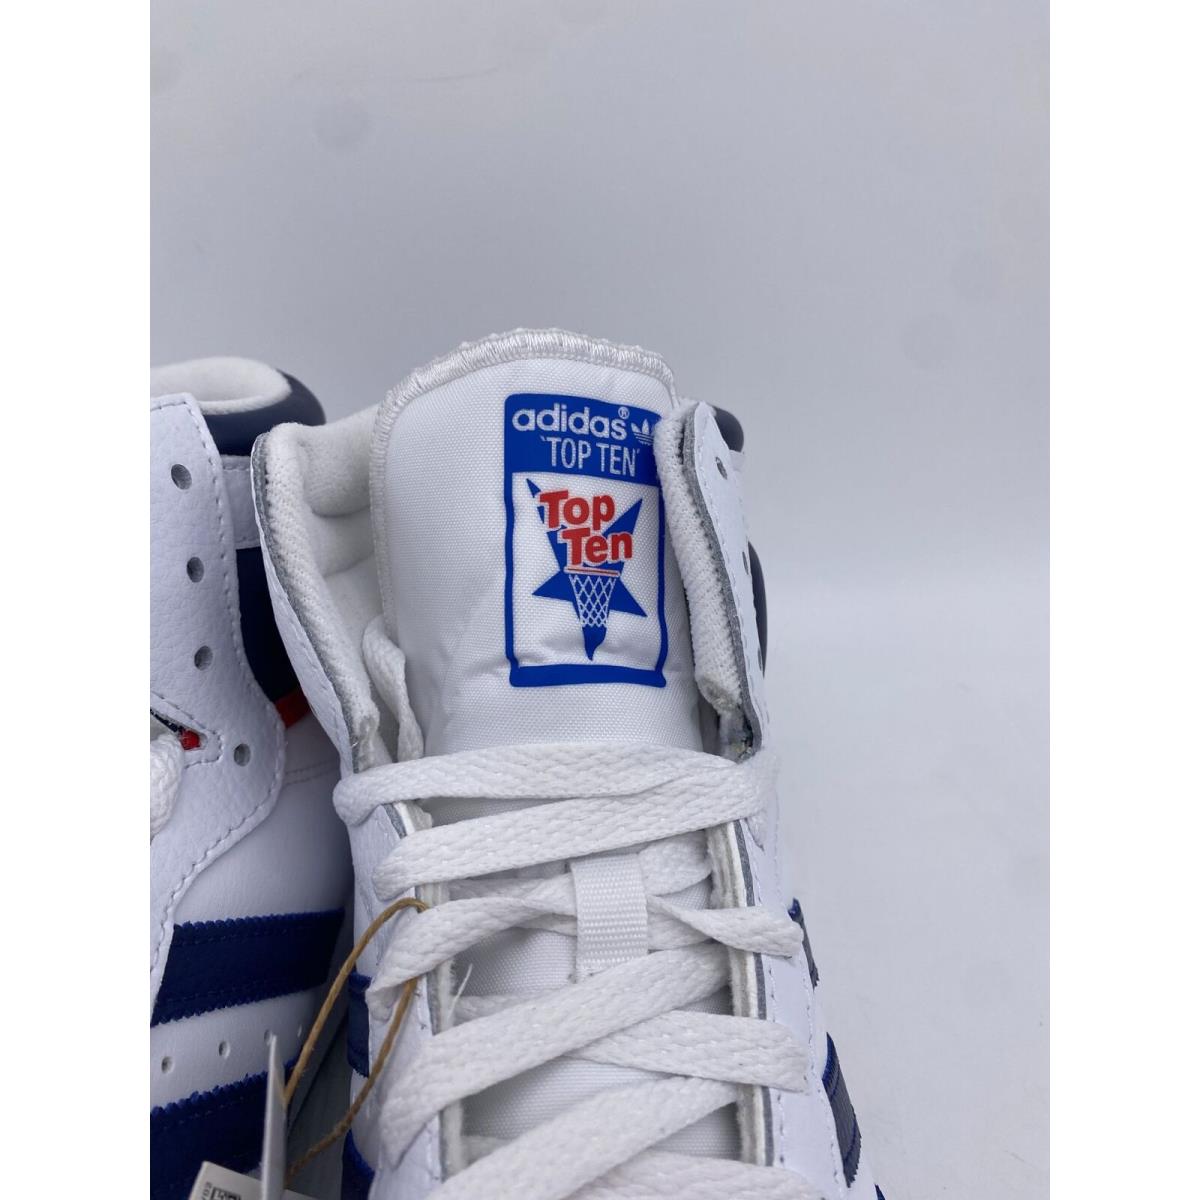 Adidas shoes  - white/blue/red 7